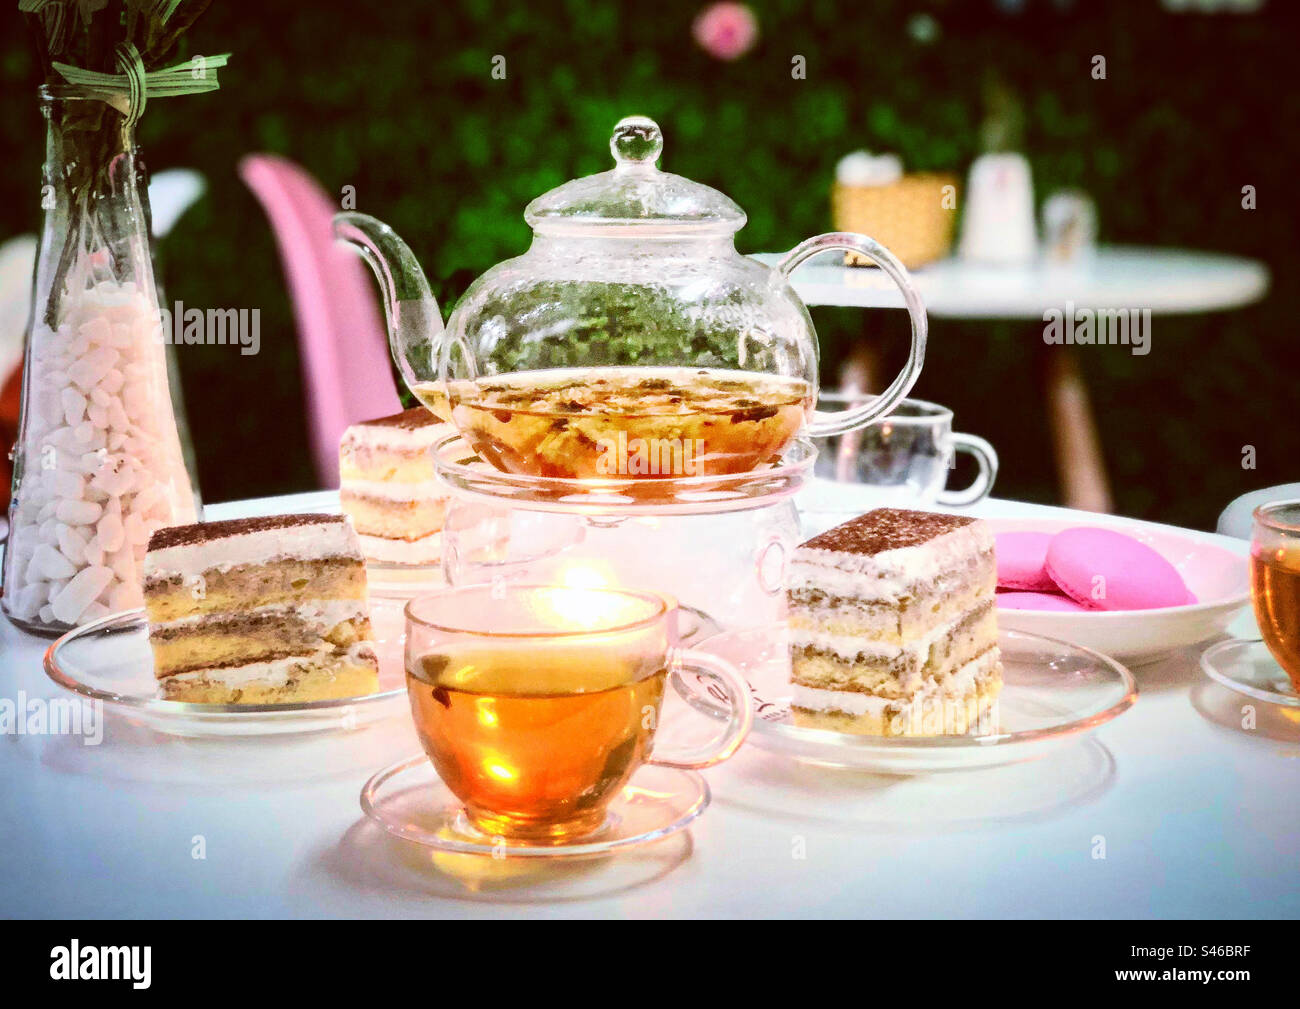 Cakes and tea time Stock Photo